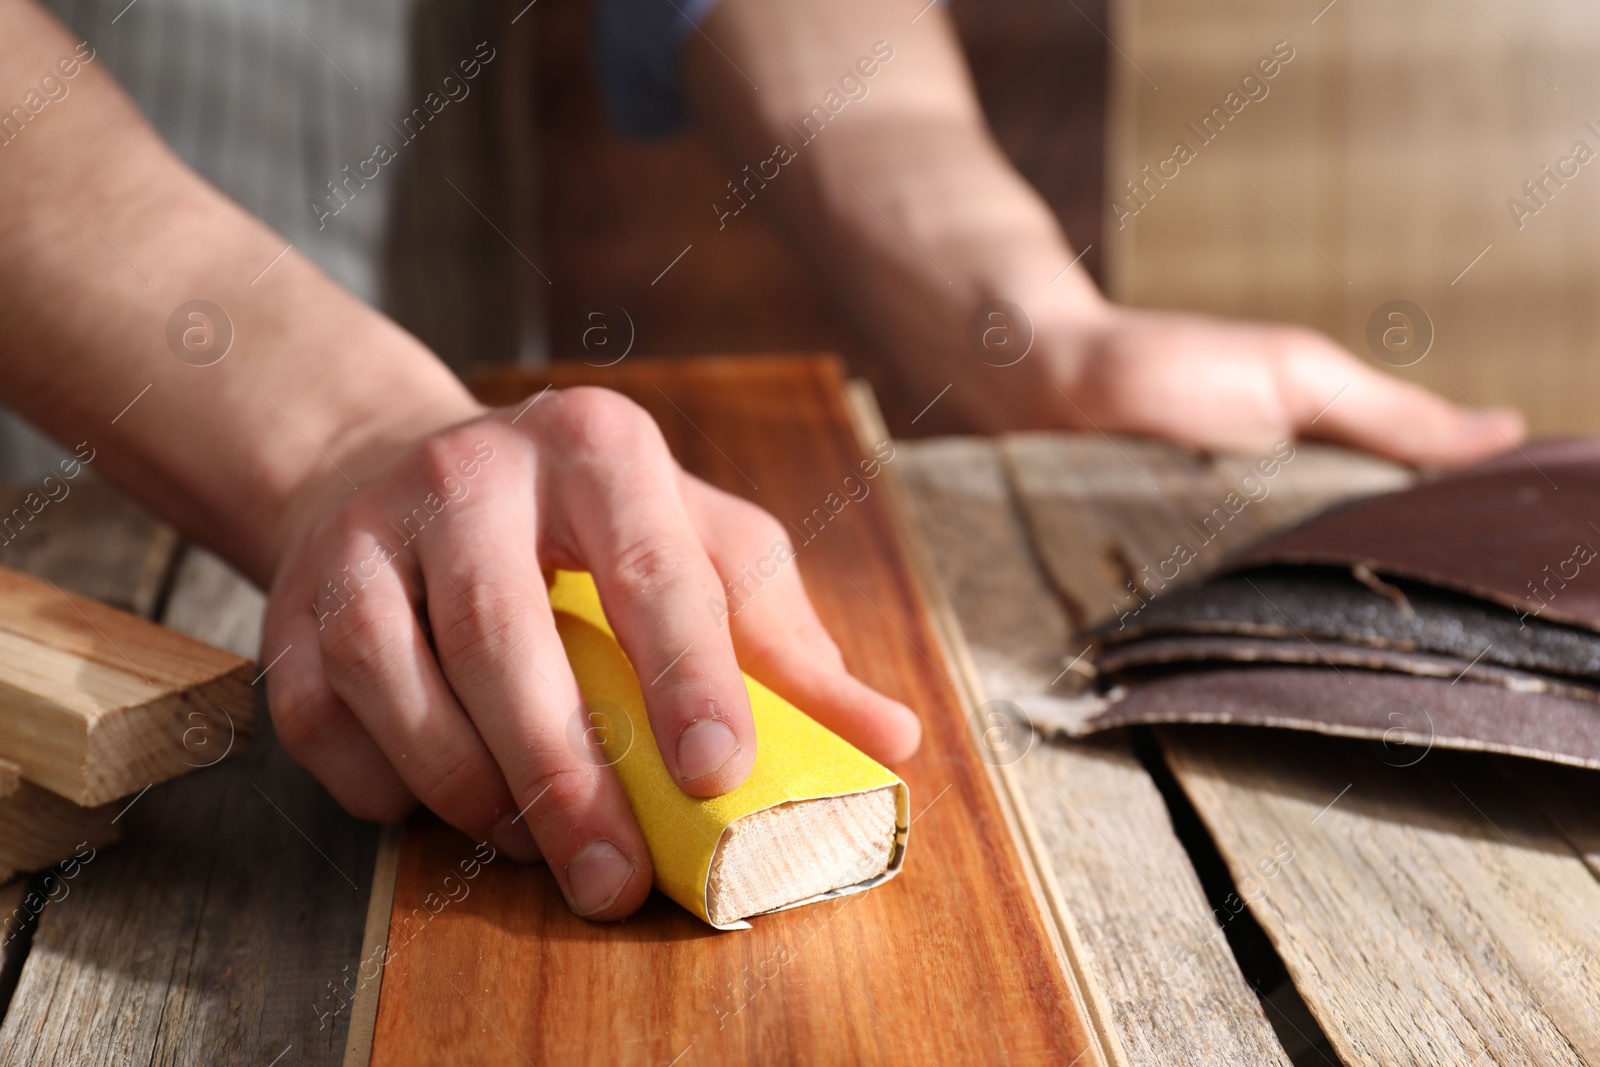 Photo of Man polishing wooden plank with sandpaper at table indoors, closeup